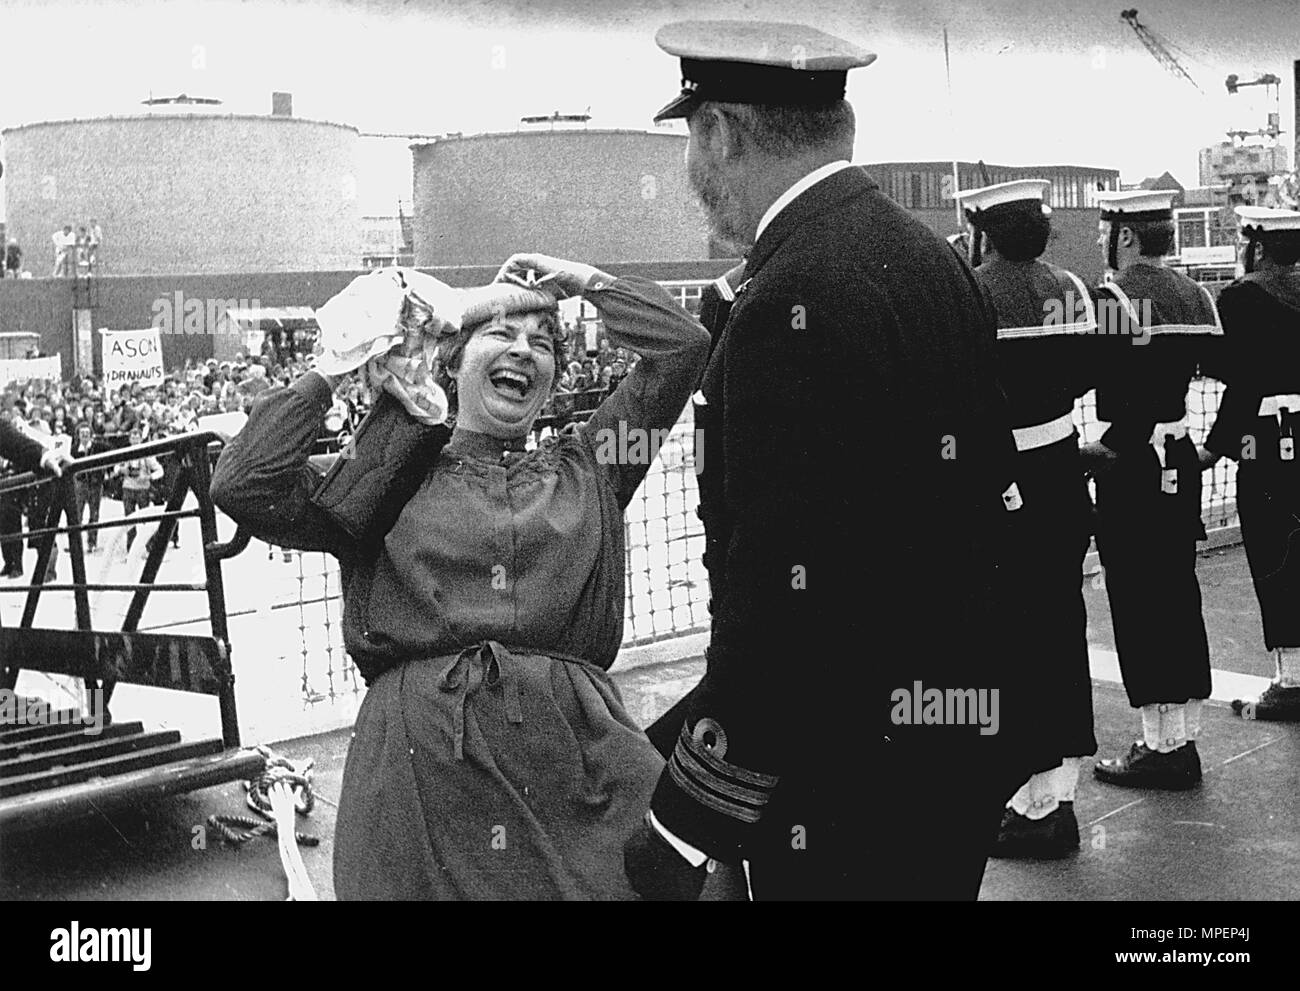 WIFE OF SKIPPER OF HMS HYDRA SHONA CAMPBELL GREETS HER HUSBAND COMMANDER RICHARD CAMPBELL WHEN HMS HYDRA RETURNED TO PORTSMOUTH FROM THE FALKLANDS WAR.  1982 Stock Photo